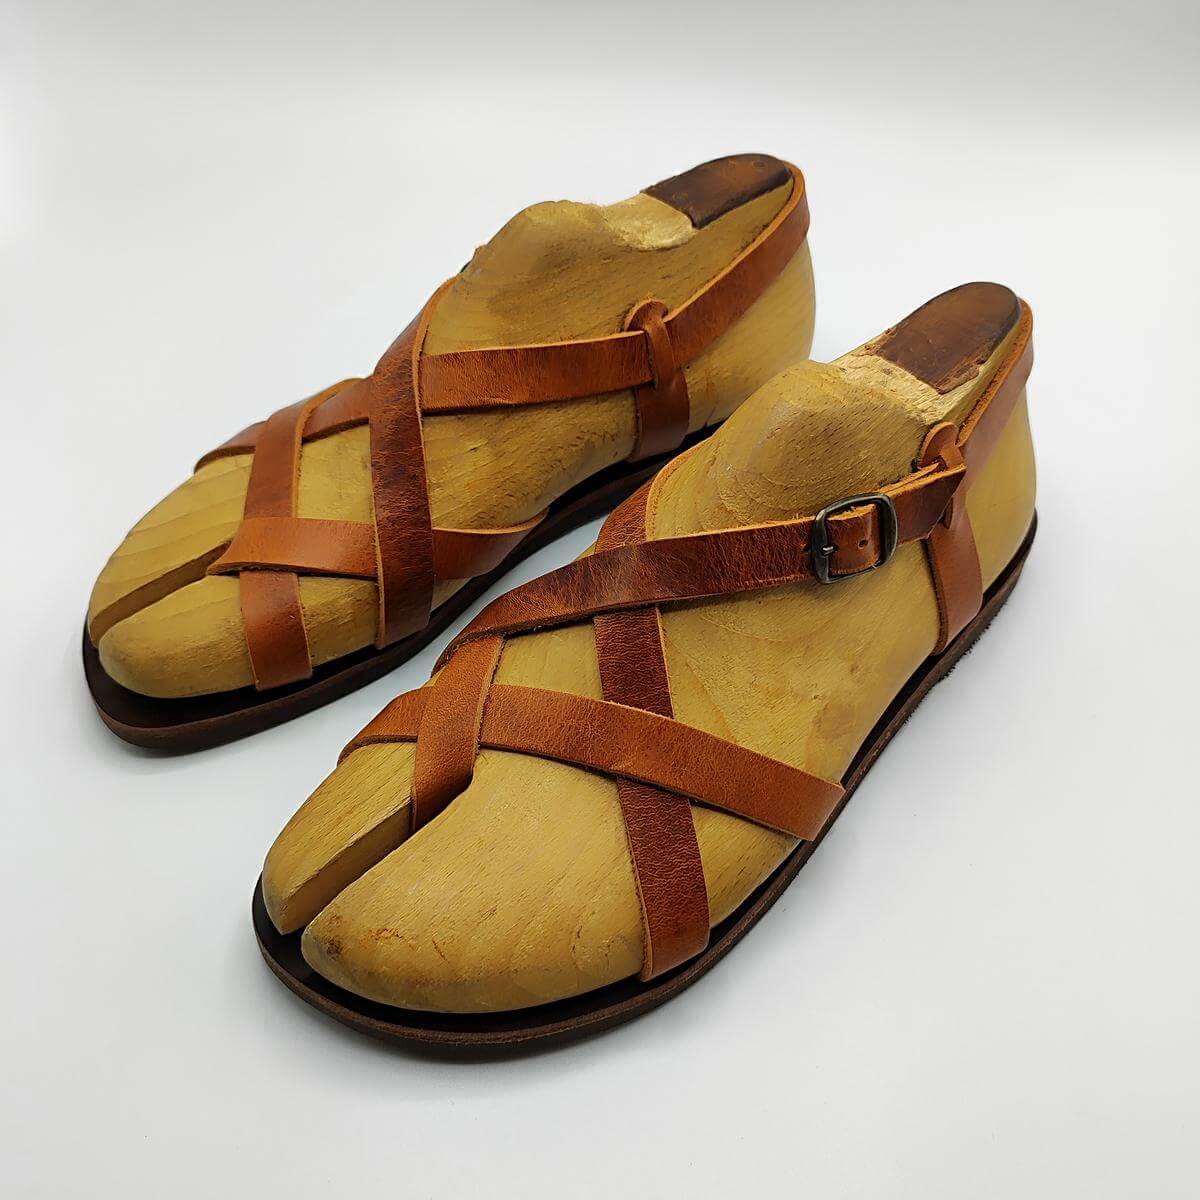 mens-casual-sandals-chocolate-brown-color